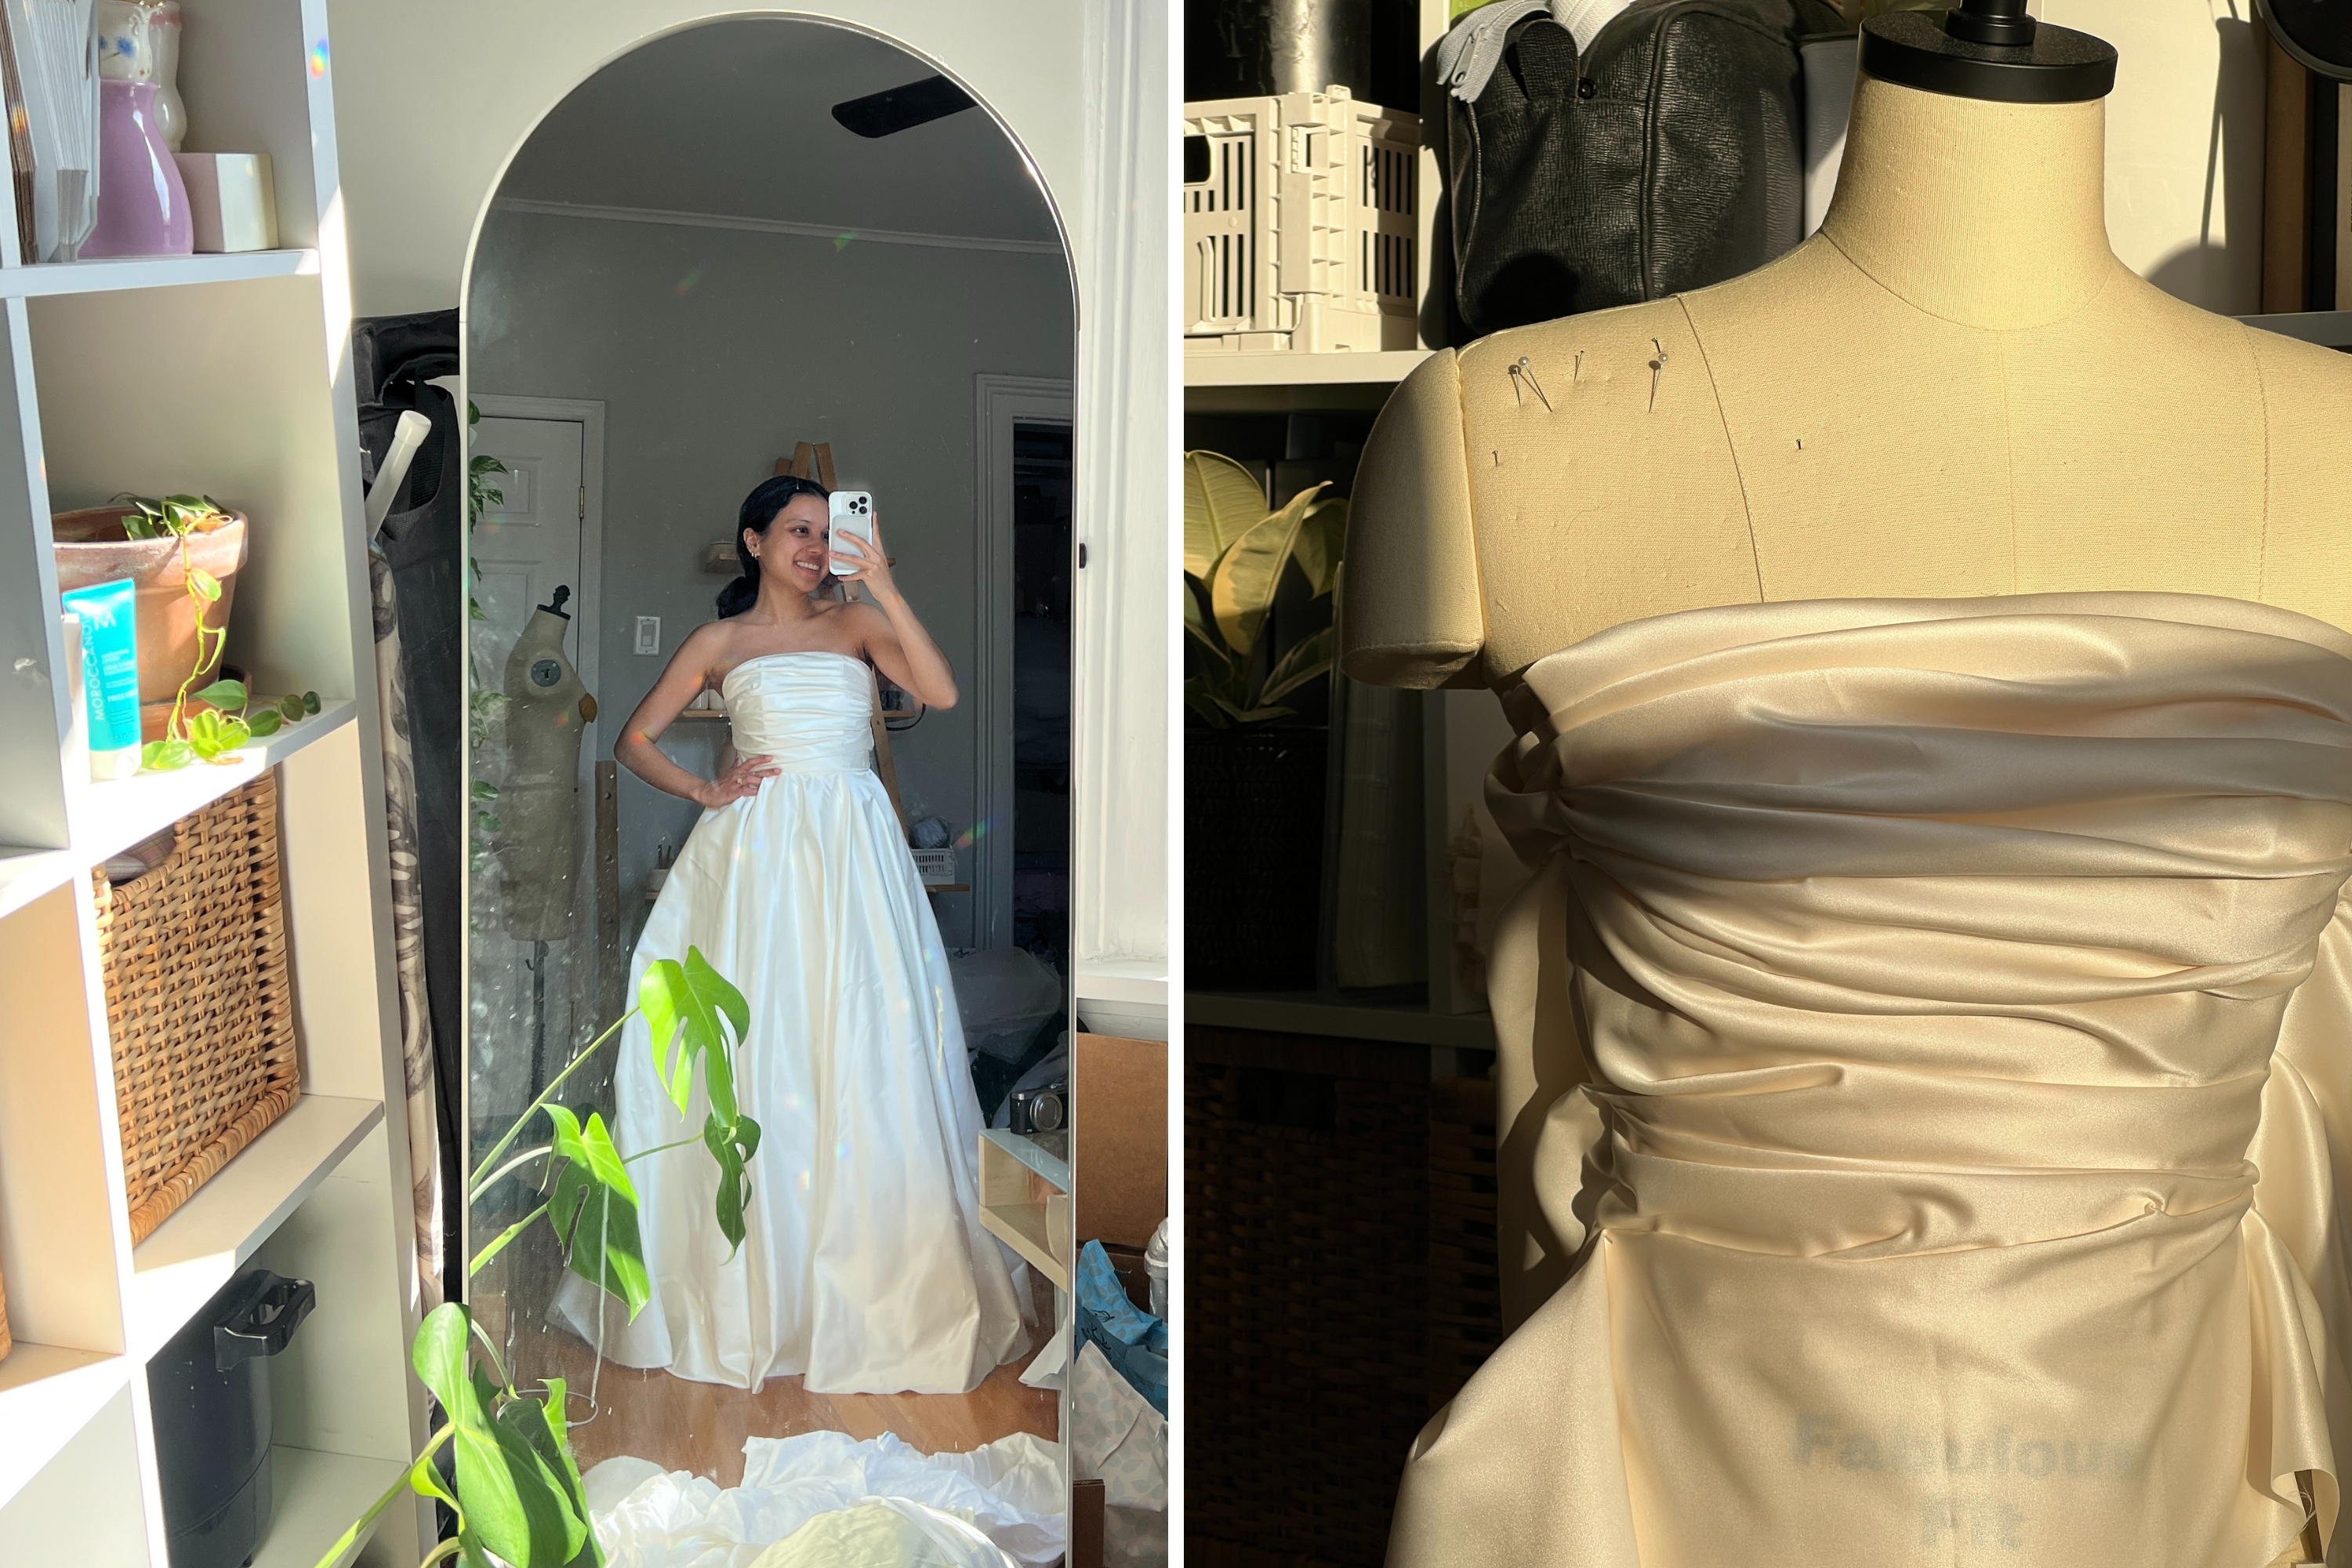 Bride disillusioned with wedding dress options takes matters into own hands